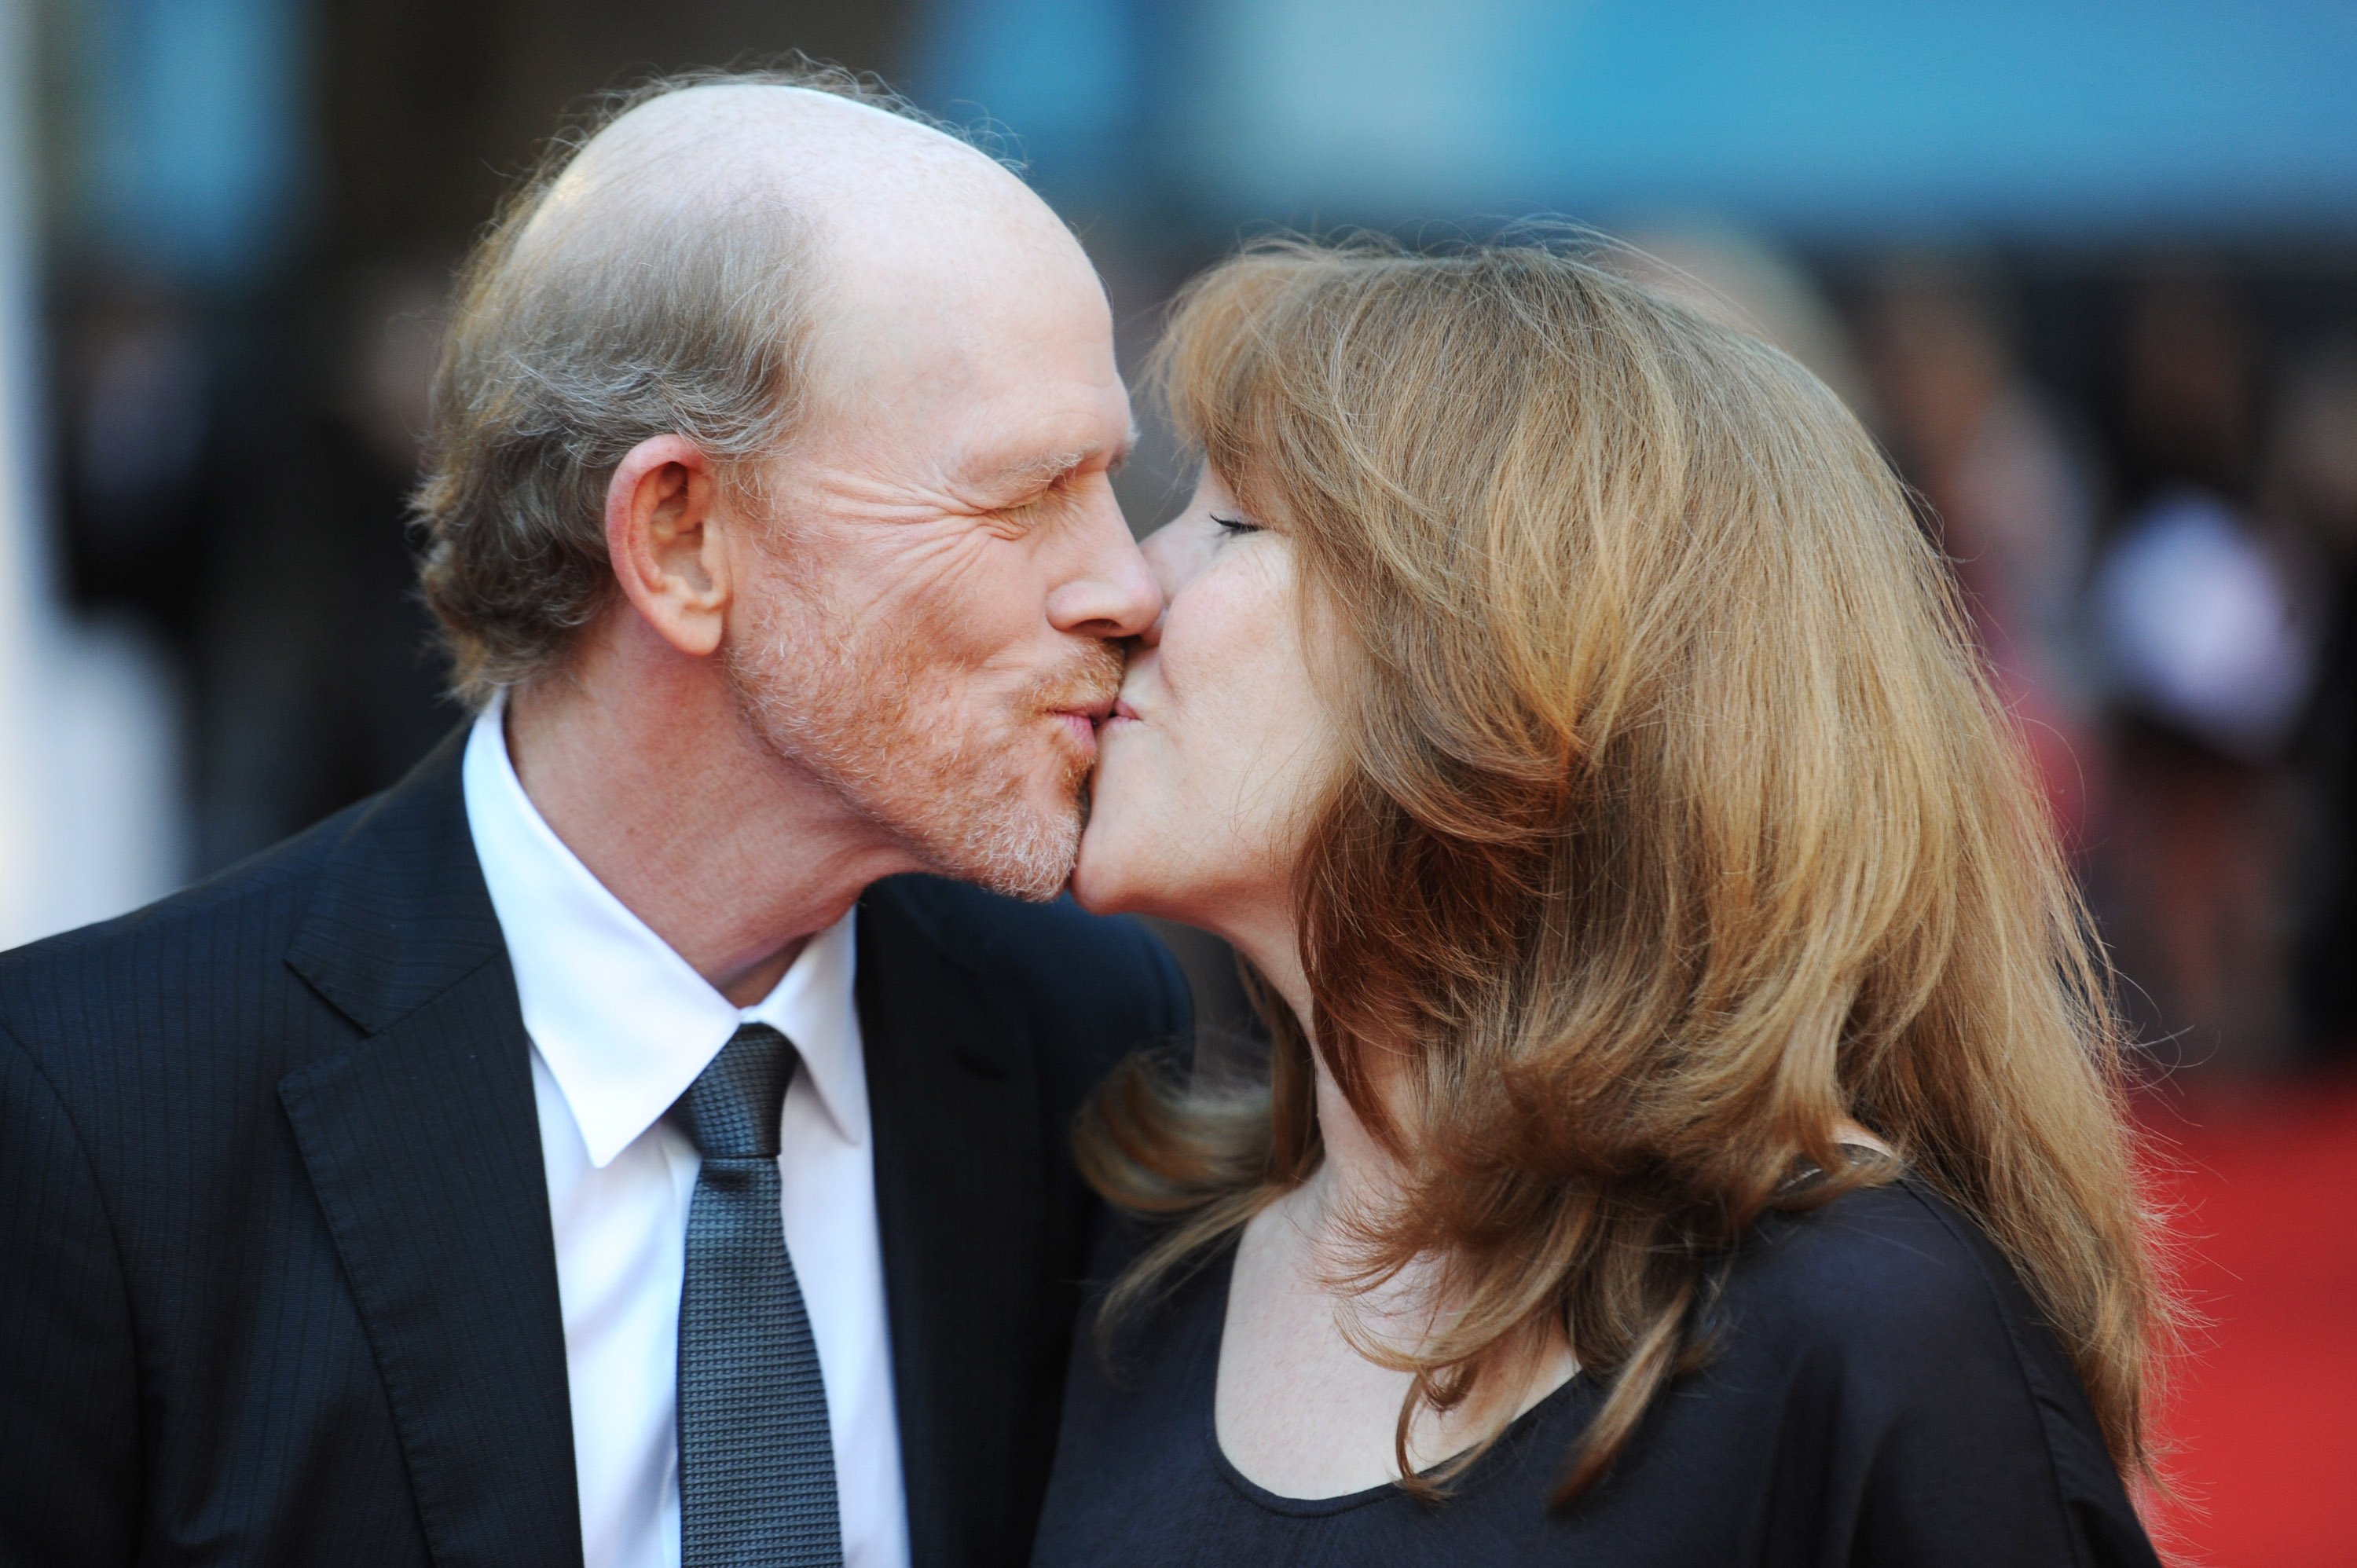 Ron Howard and his wife Cheryl Howard in London 2013. |  Source: Getty Images